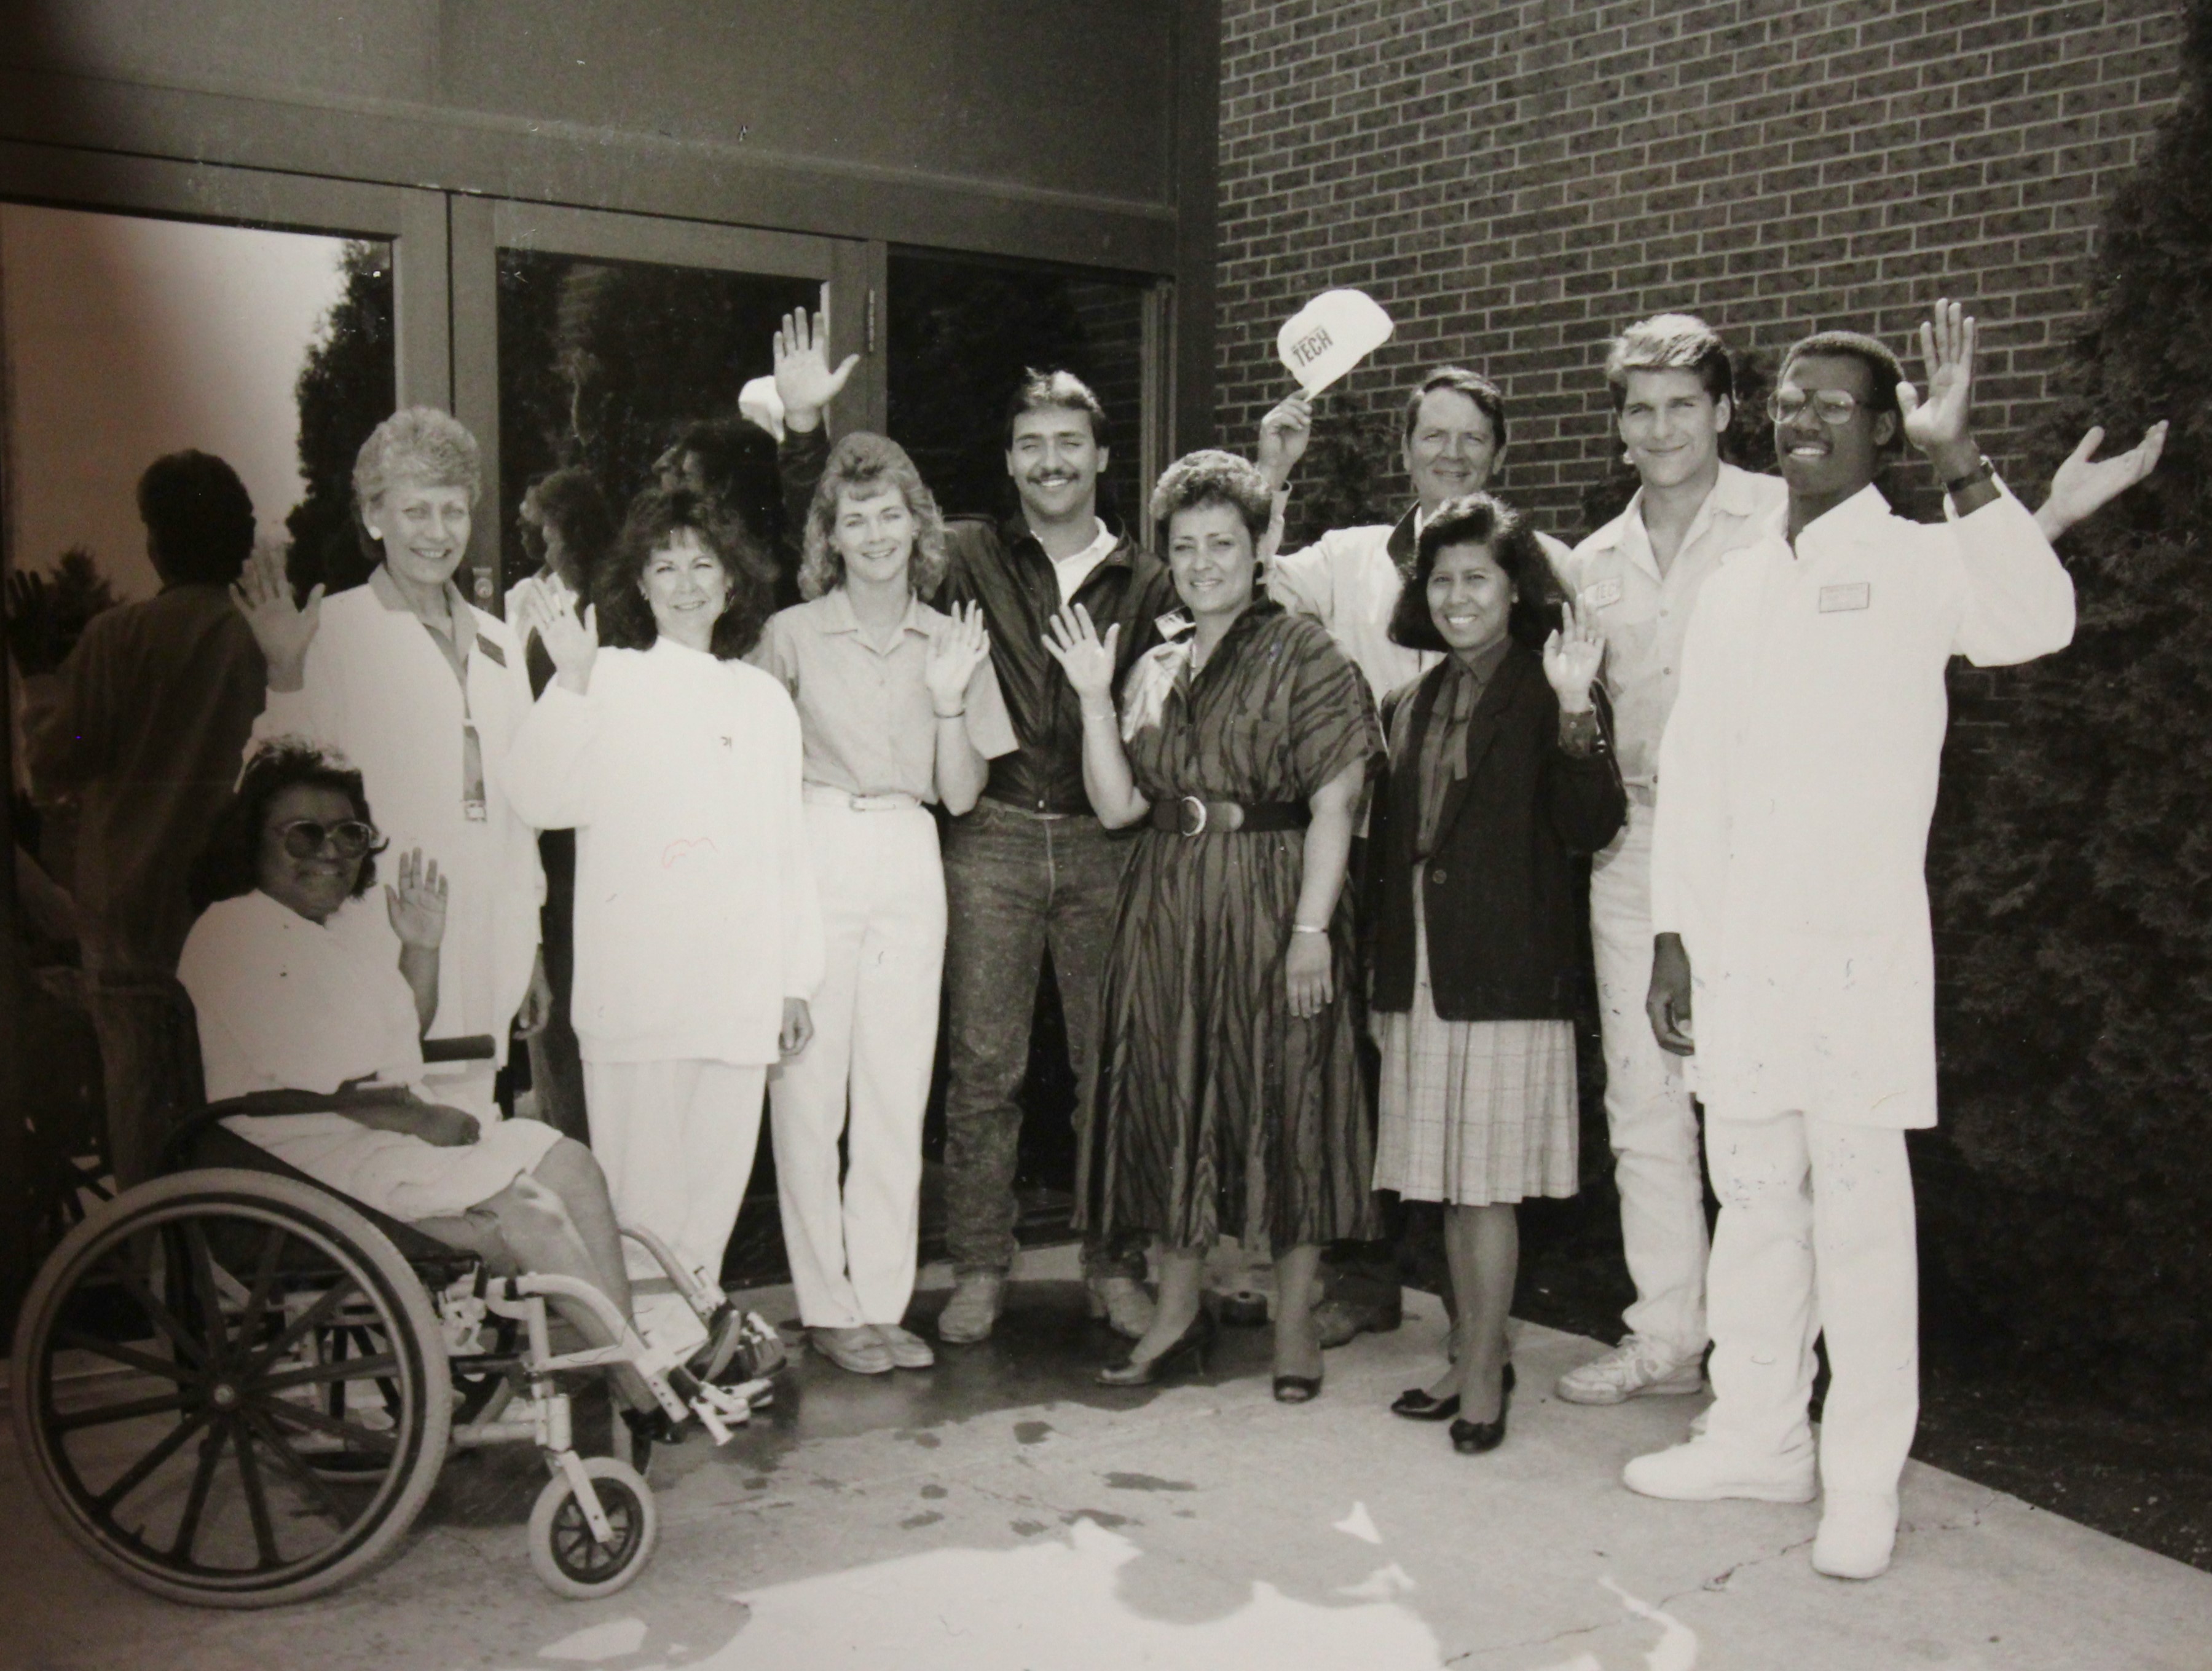 A welcoming party at the Moorhead campus, in 1992